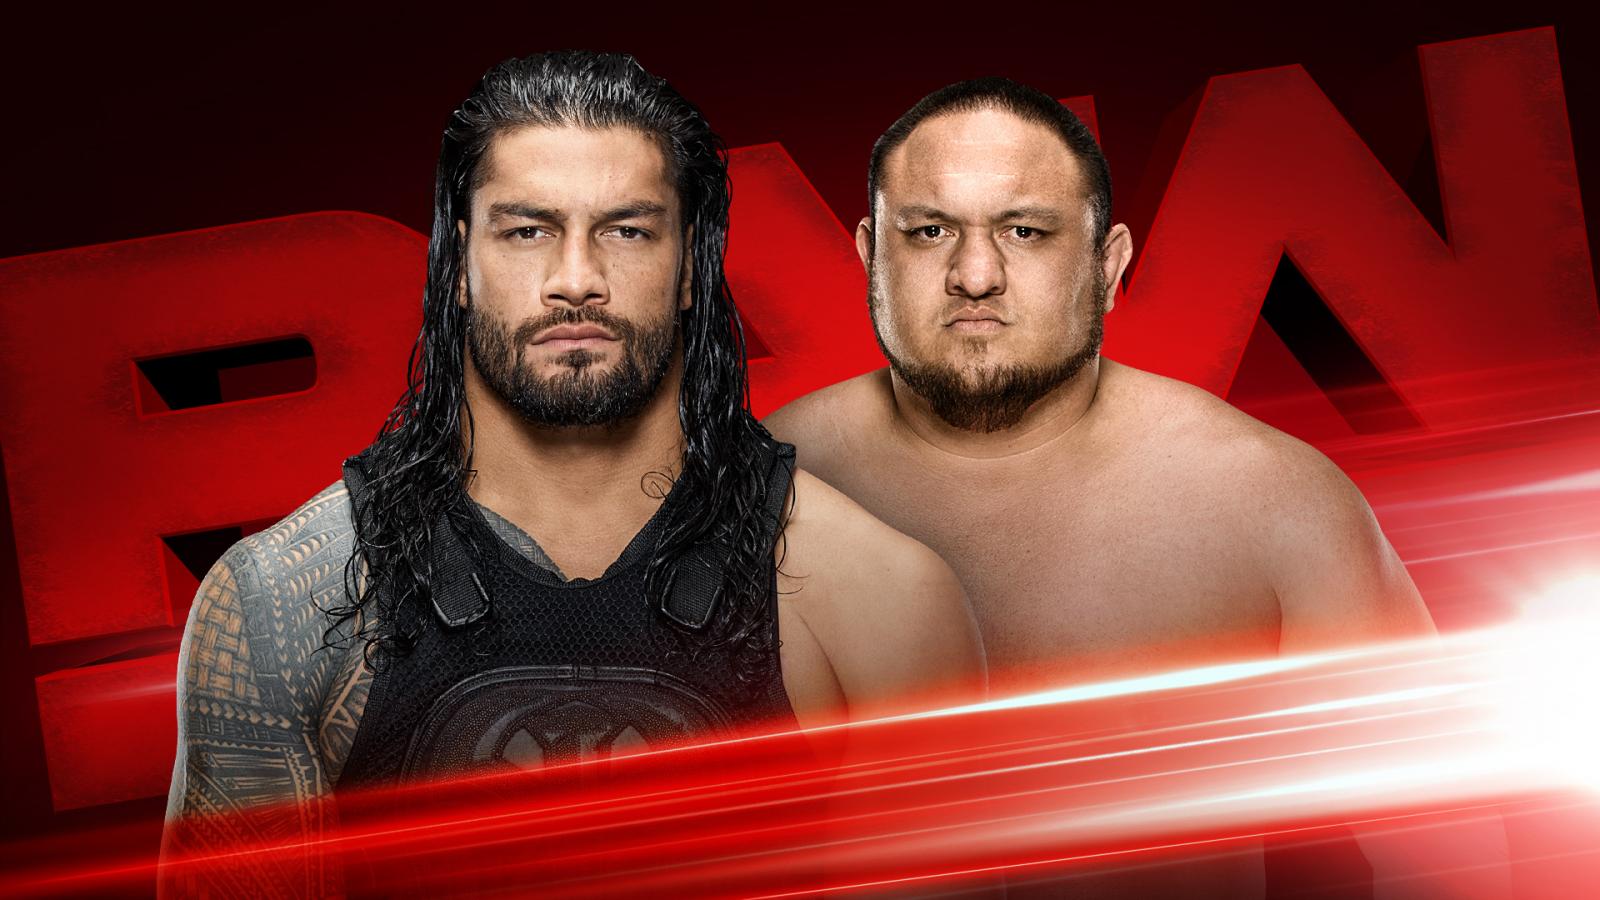 WWE 'Monday Night Raw' Match Results & Spoilers July 17th